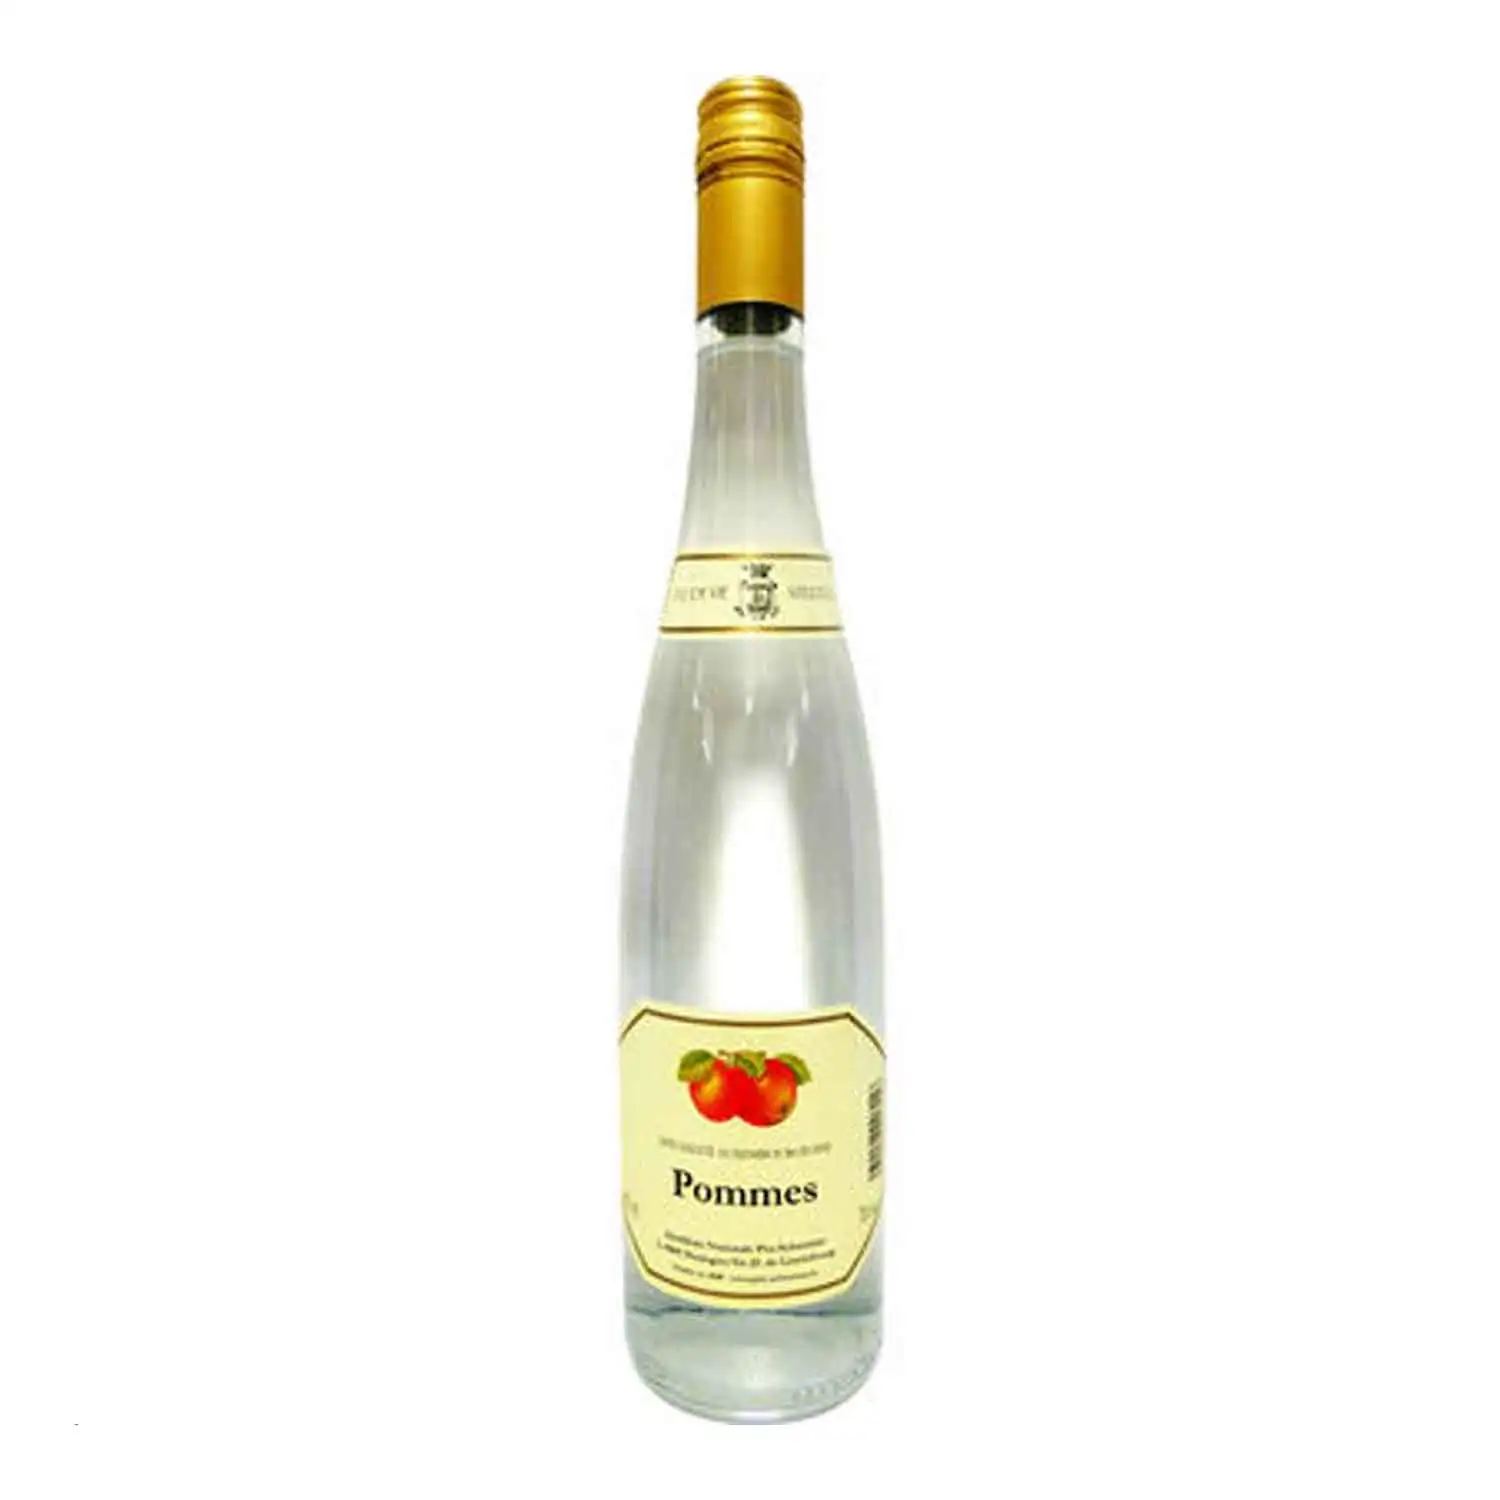 Pommes 70cl Alc 40% - Buy at Real Tobacco